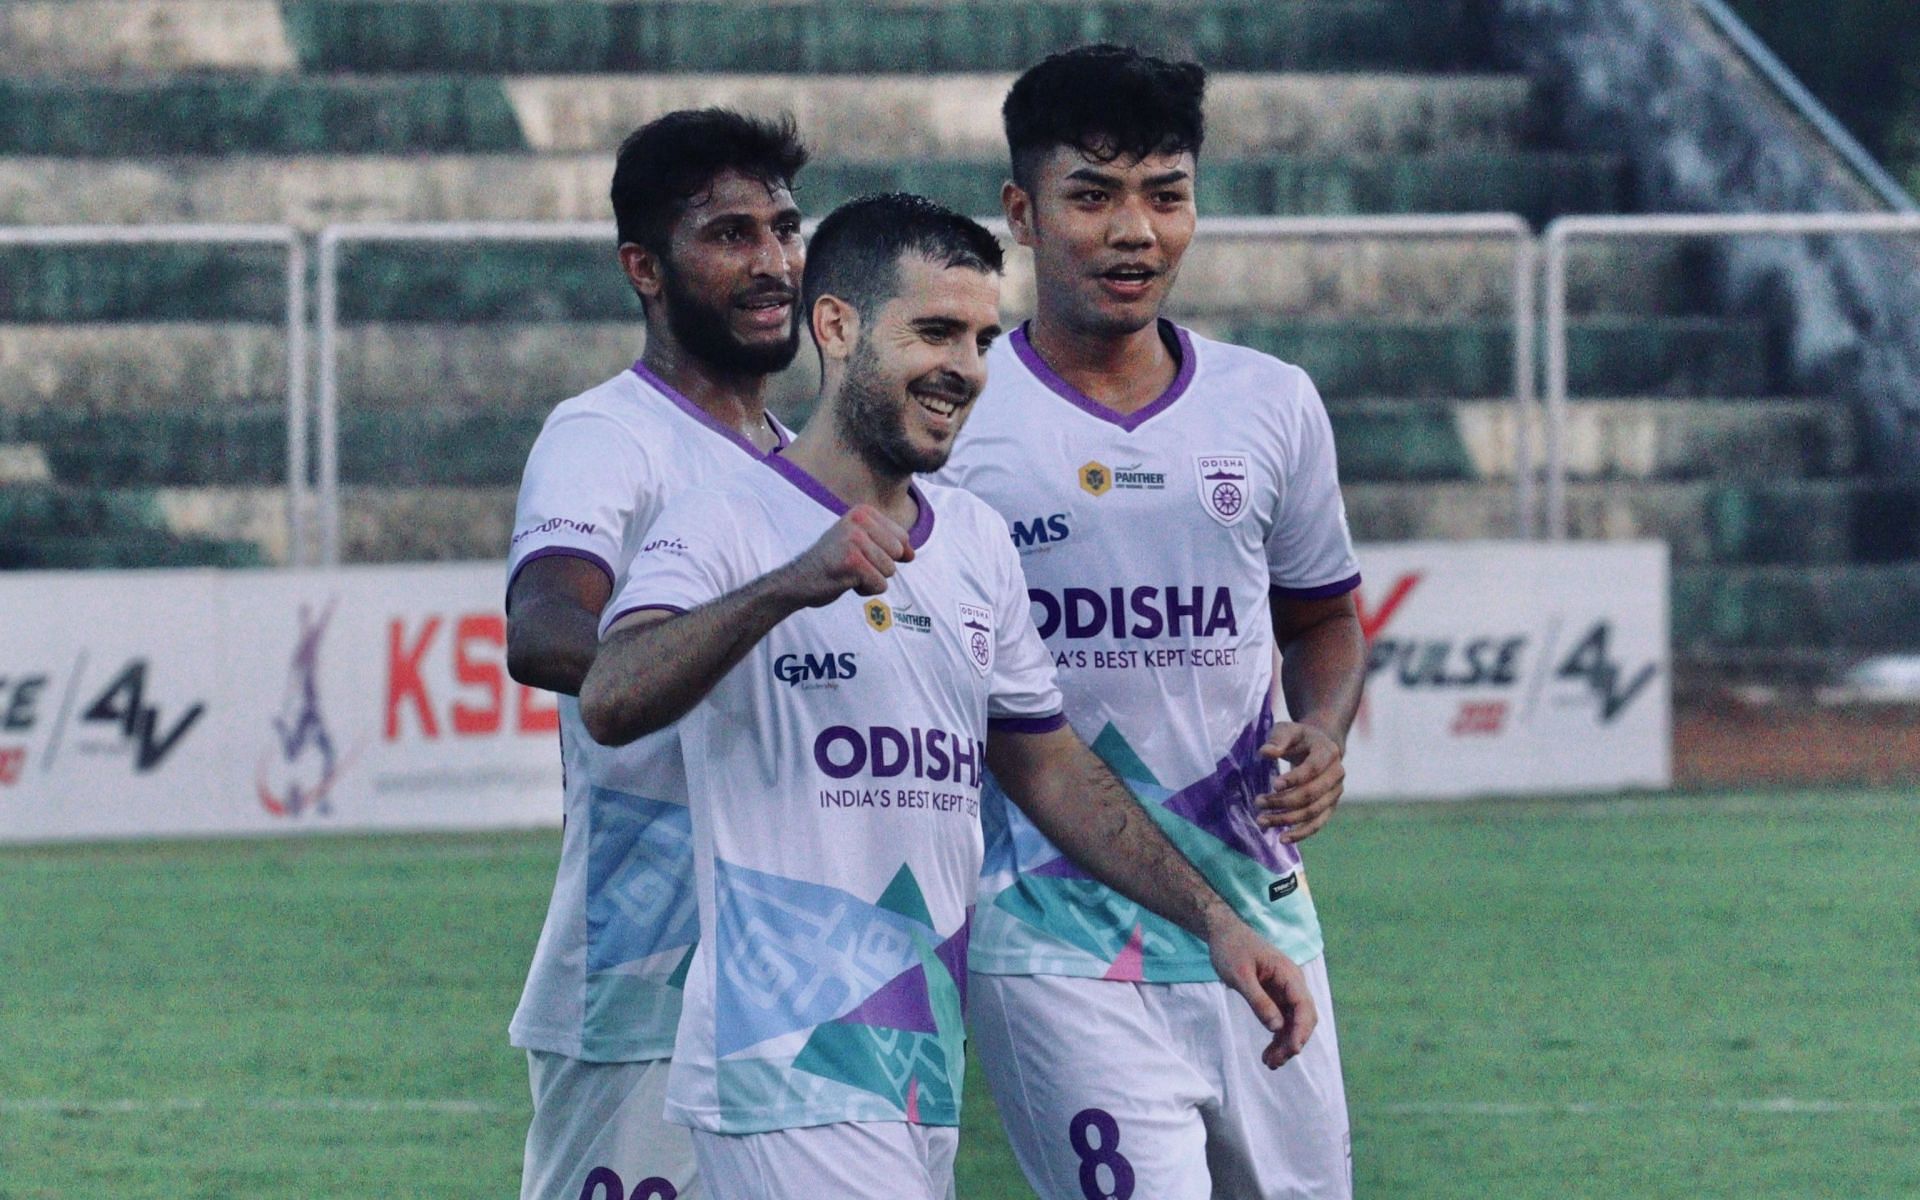 Victor Rodriguez was one of the brightest prospect in the Odisha FC side.